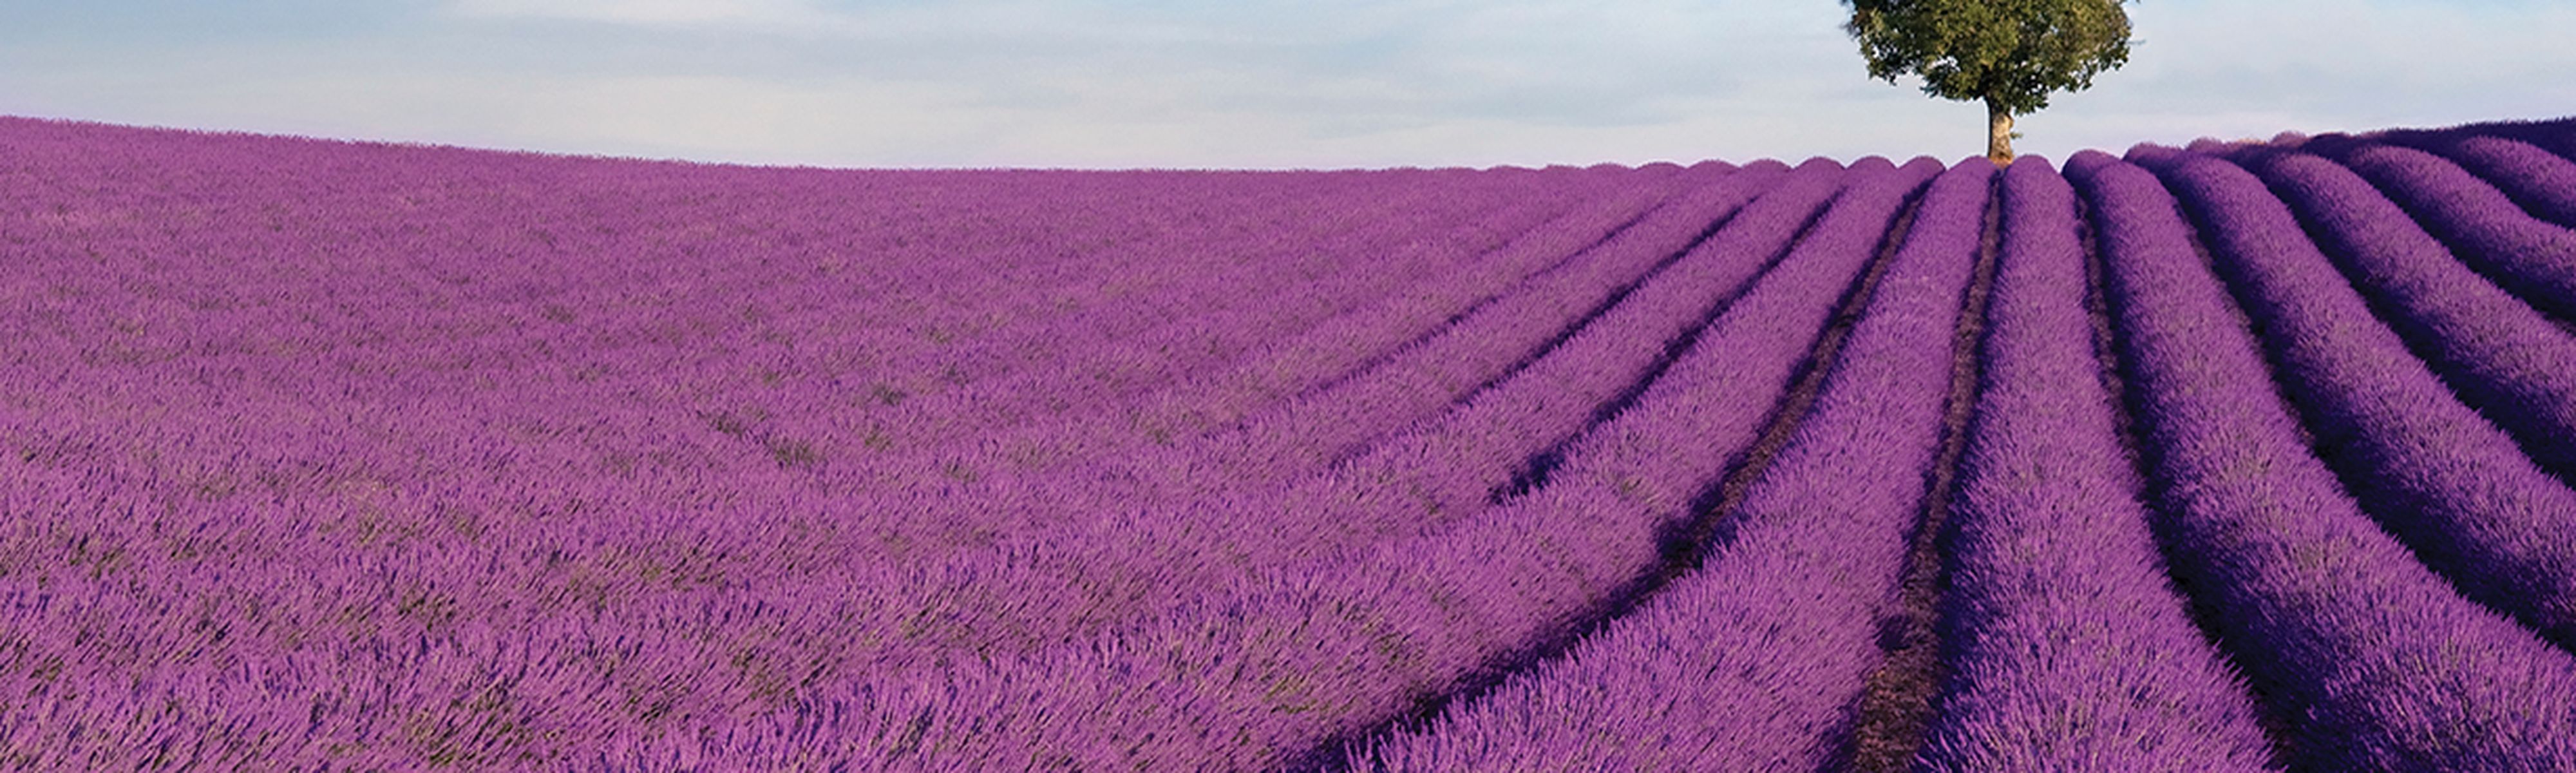 Lavender Field in Provence, France